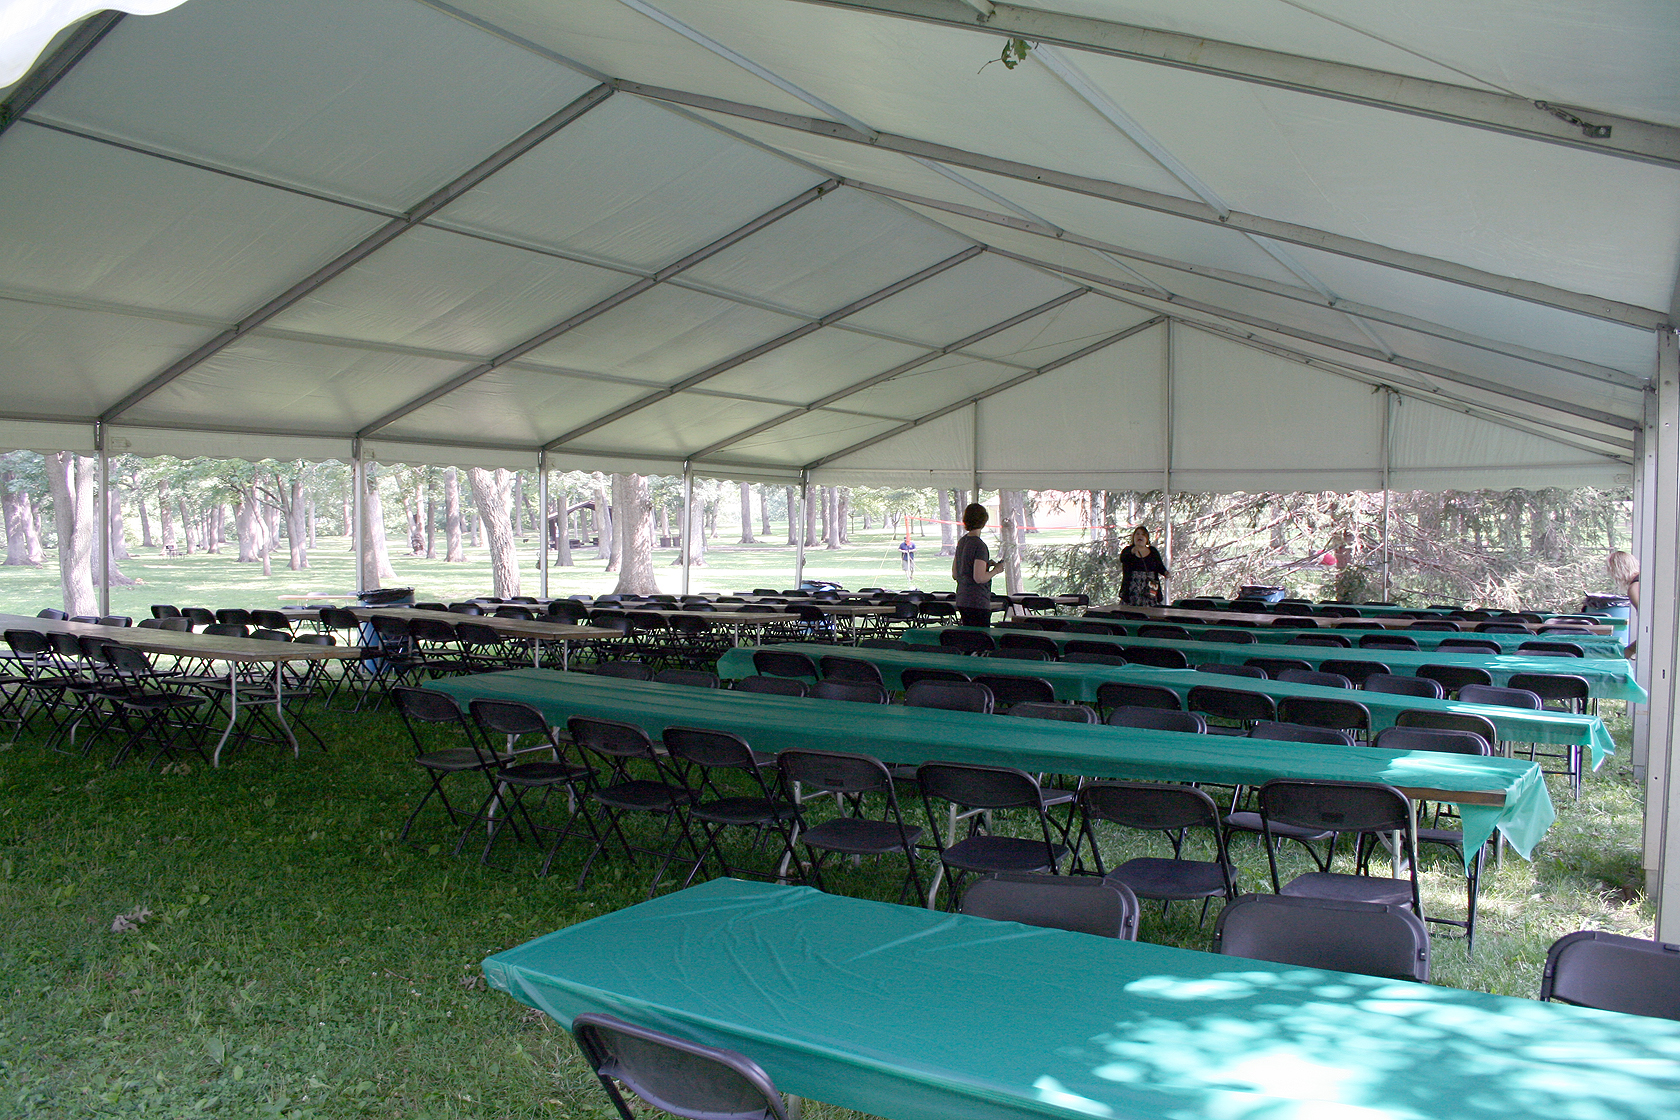 View under the 40' x 60' Losberger temporary structure setup in the Upper City Park in Iowa City, IA.